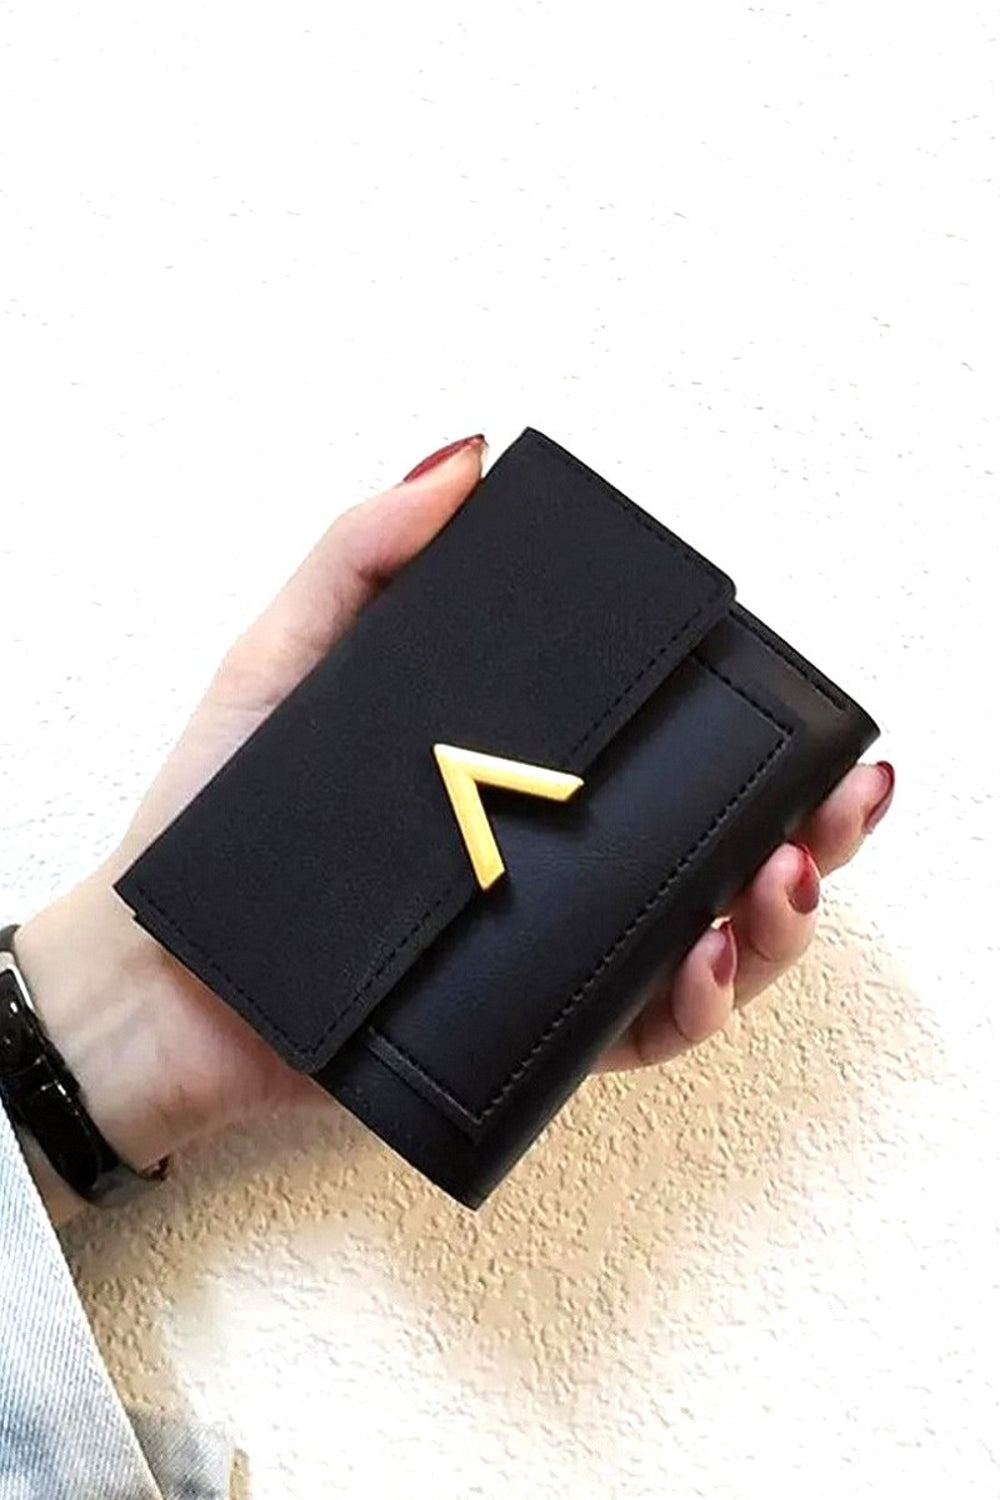 Luxe Compact Trifold Wallet